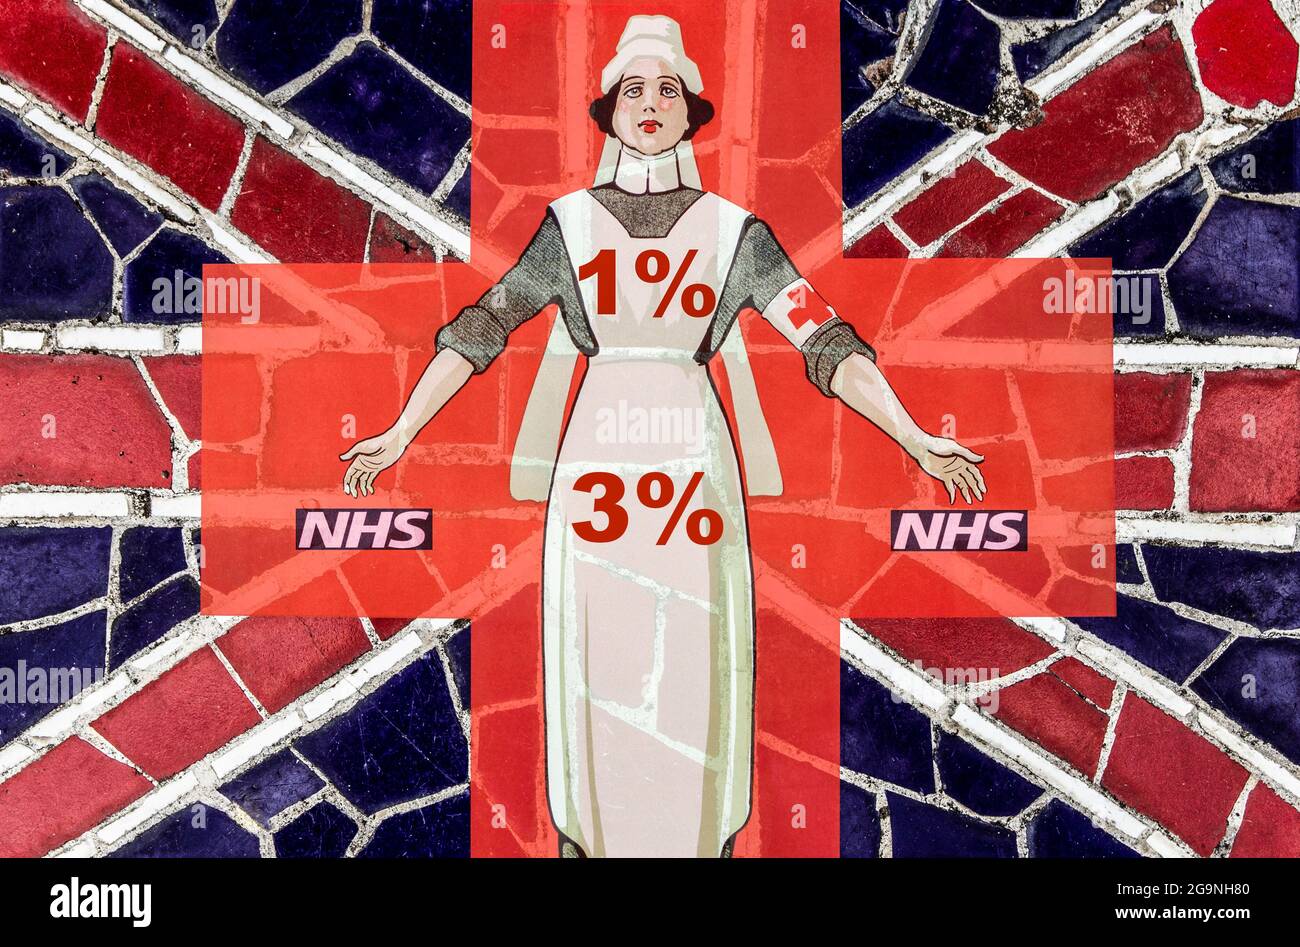 Image of nurse on Red Cross overlayed on UK flag. NHS nurses proposed 1%/3% pay increase, nursing... concept Stock Photo